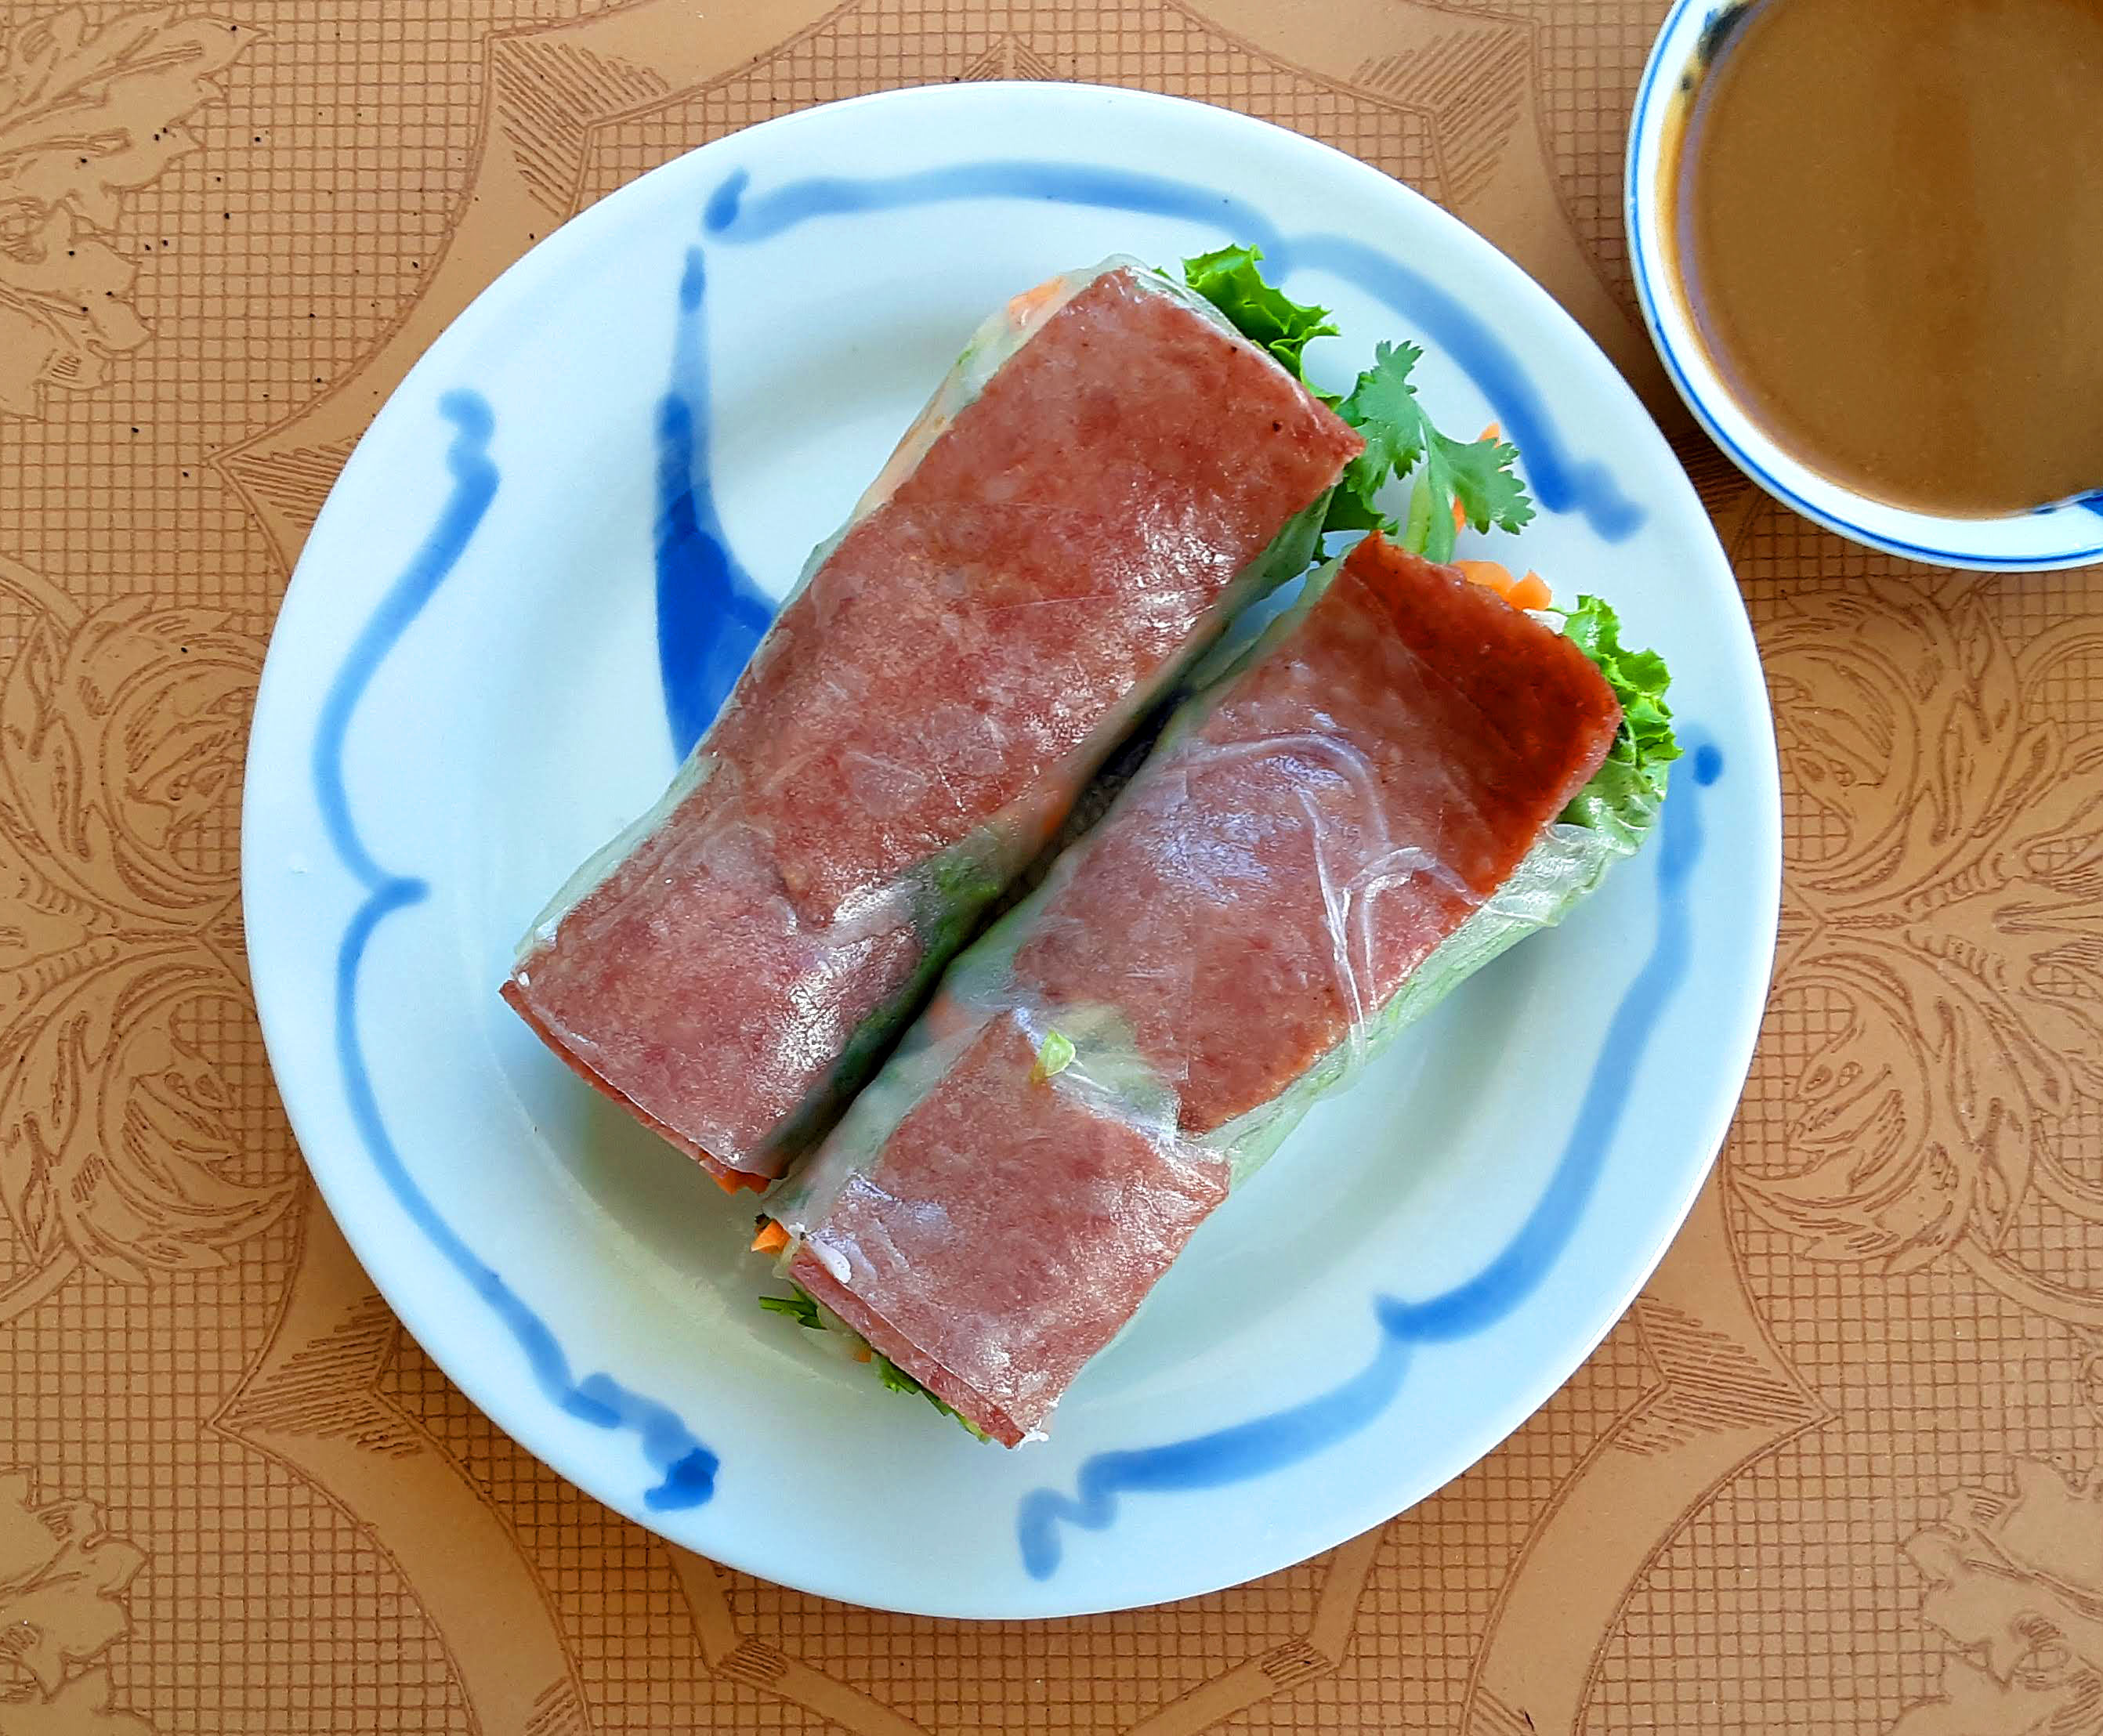 On a white plate with blue streaks on the border, there are two soft summer rolls from Xinh Xinh Cafe. Photo by Paul Young.